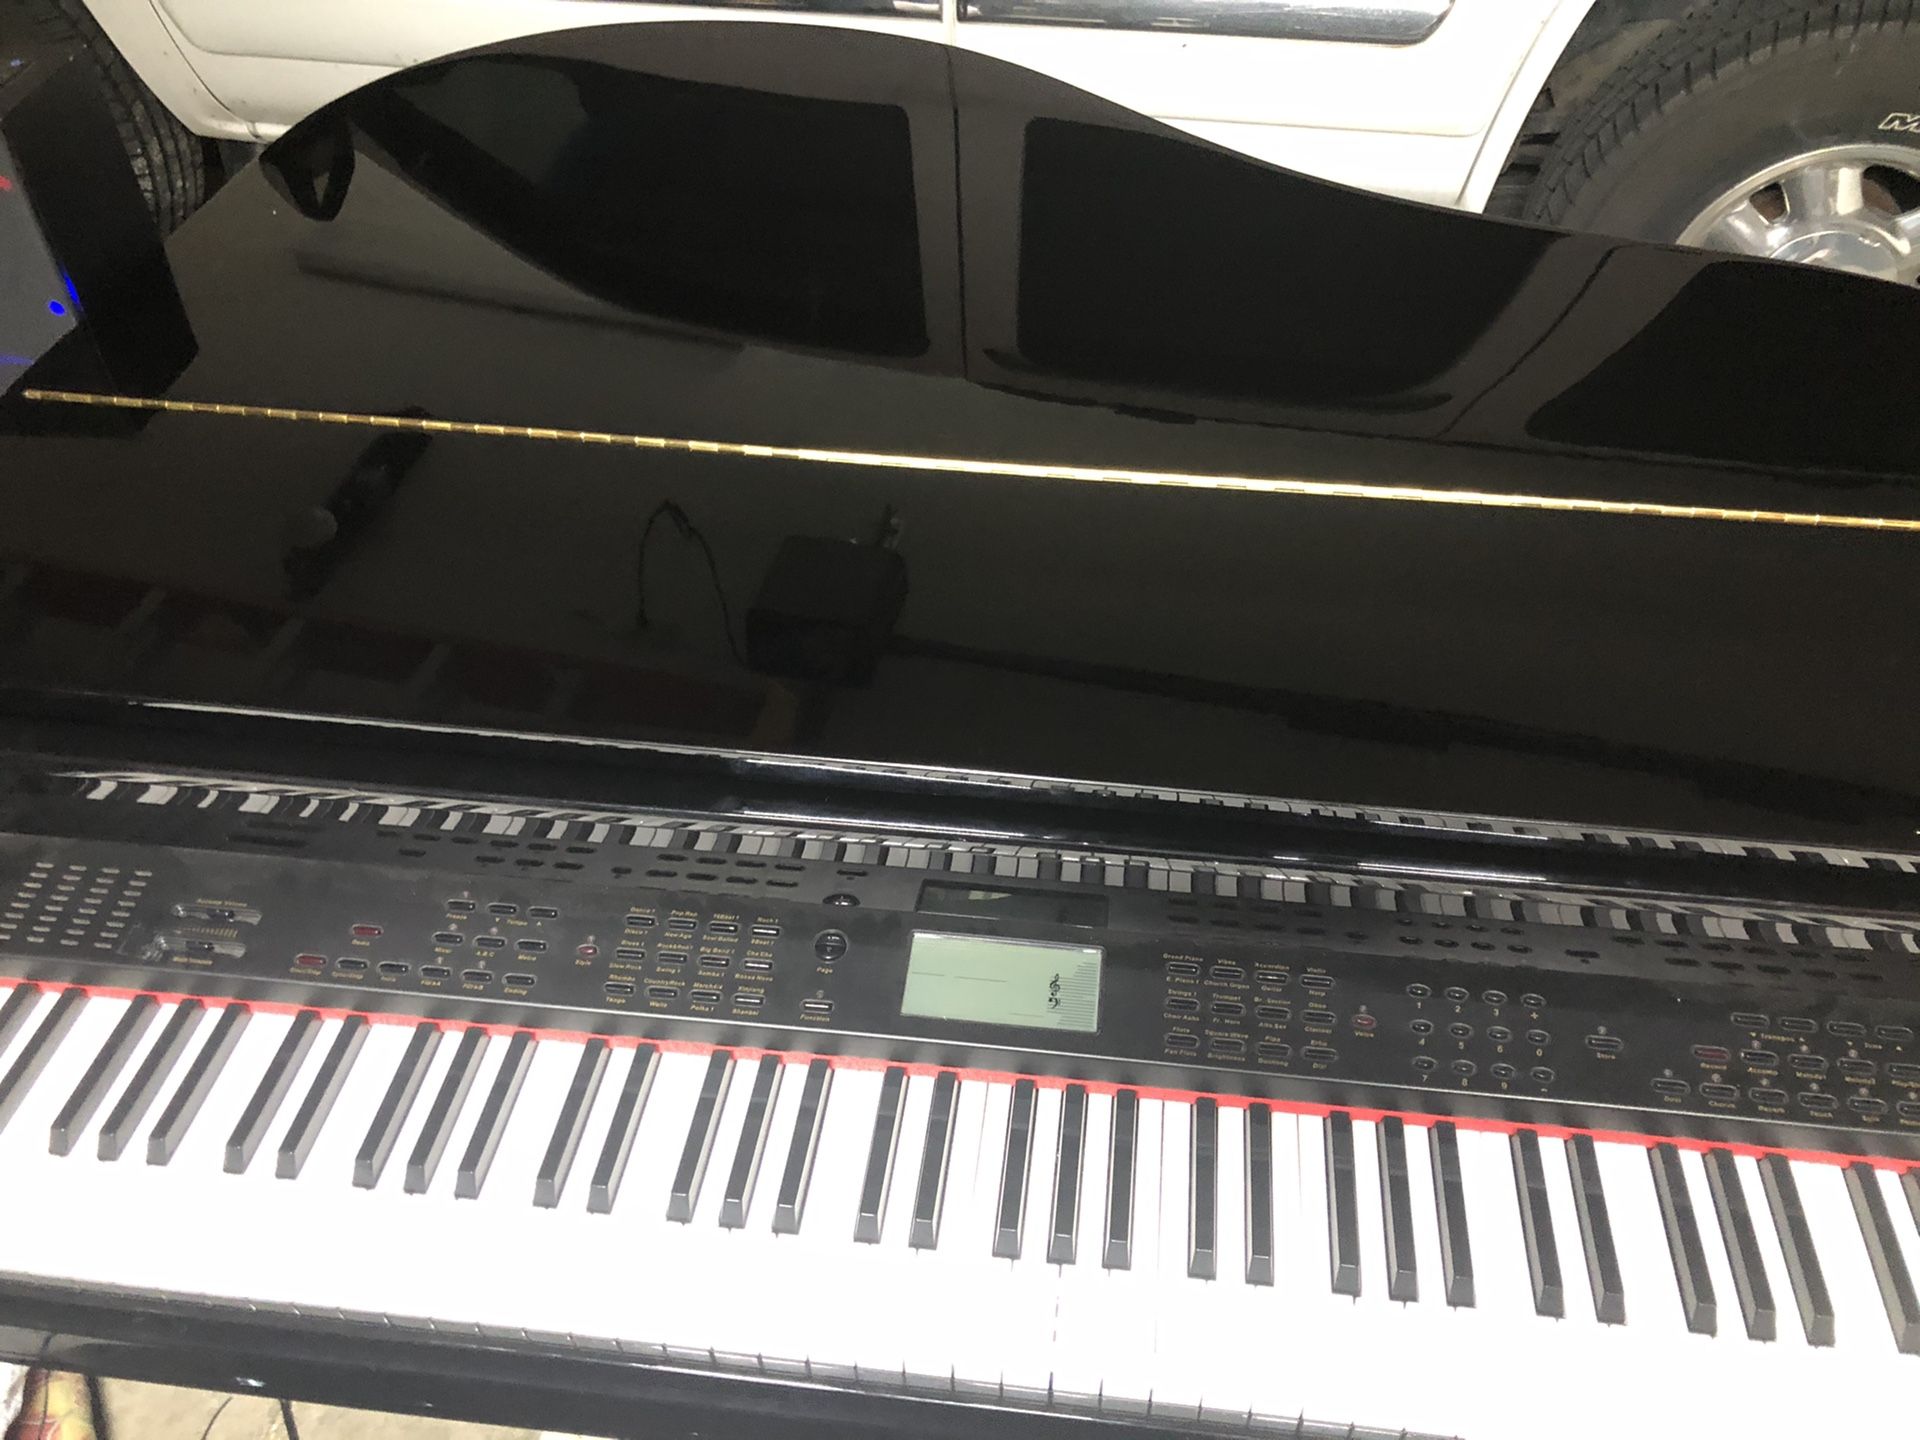 Electric baby grand piano contains sound bar and sub woofer